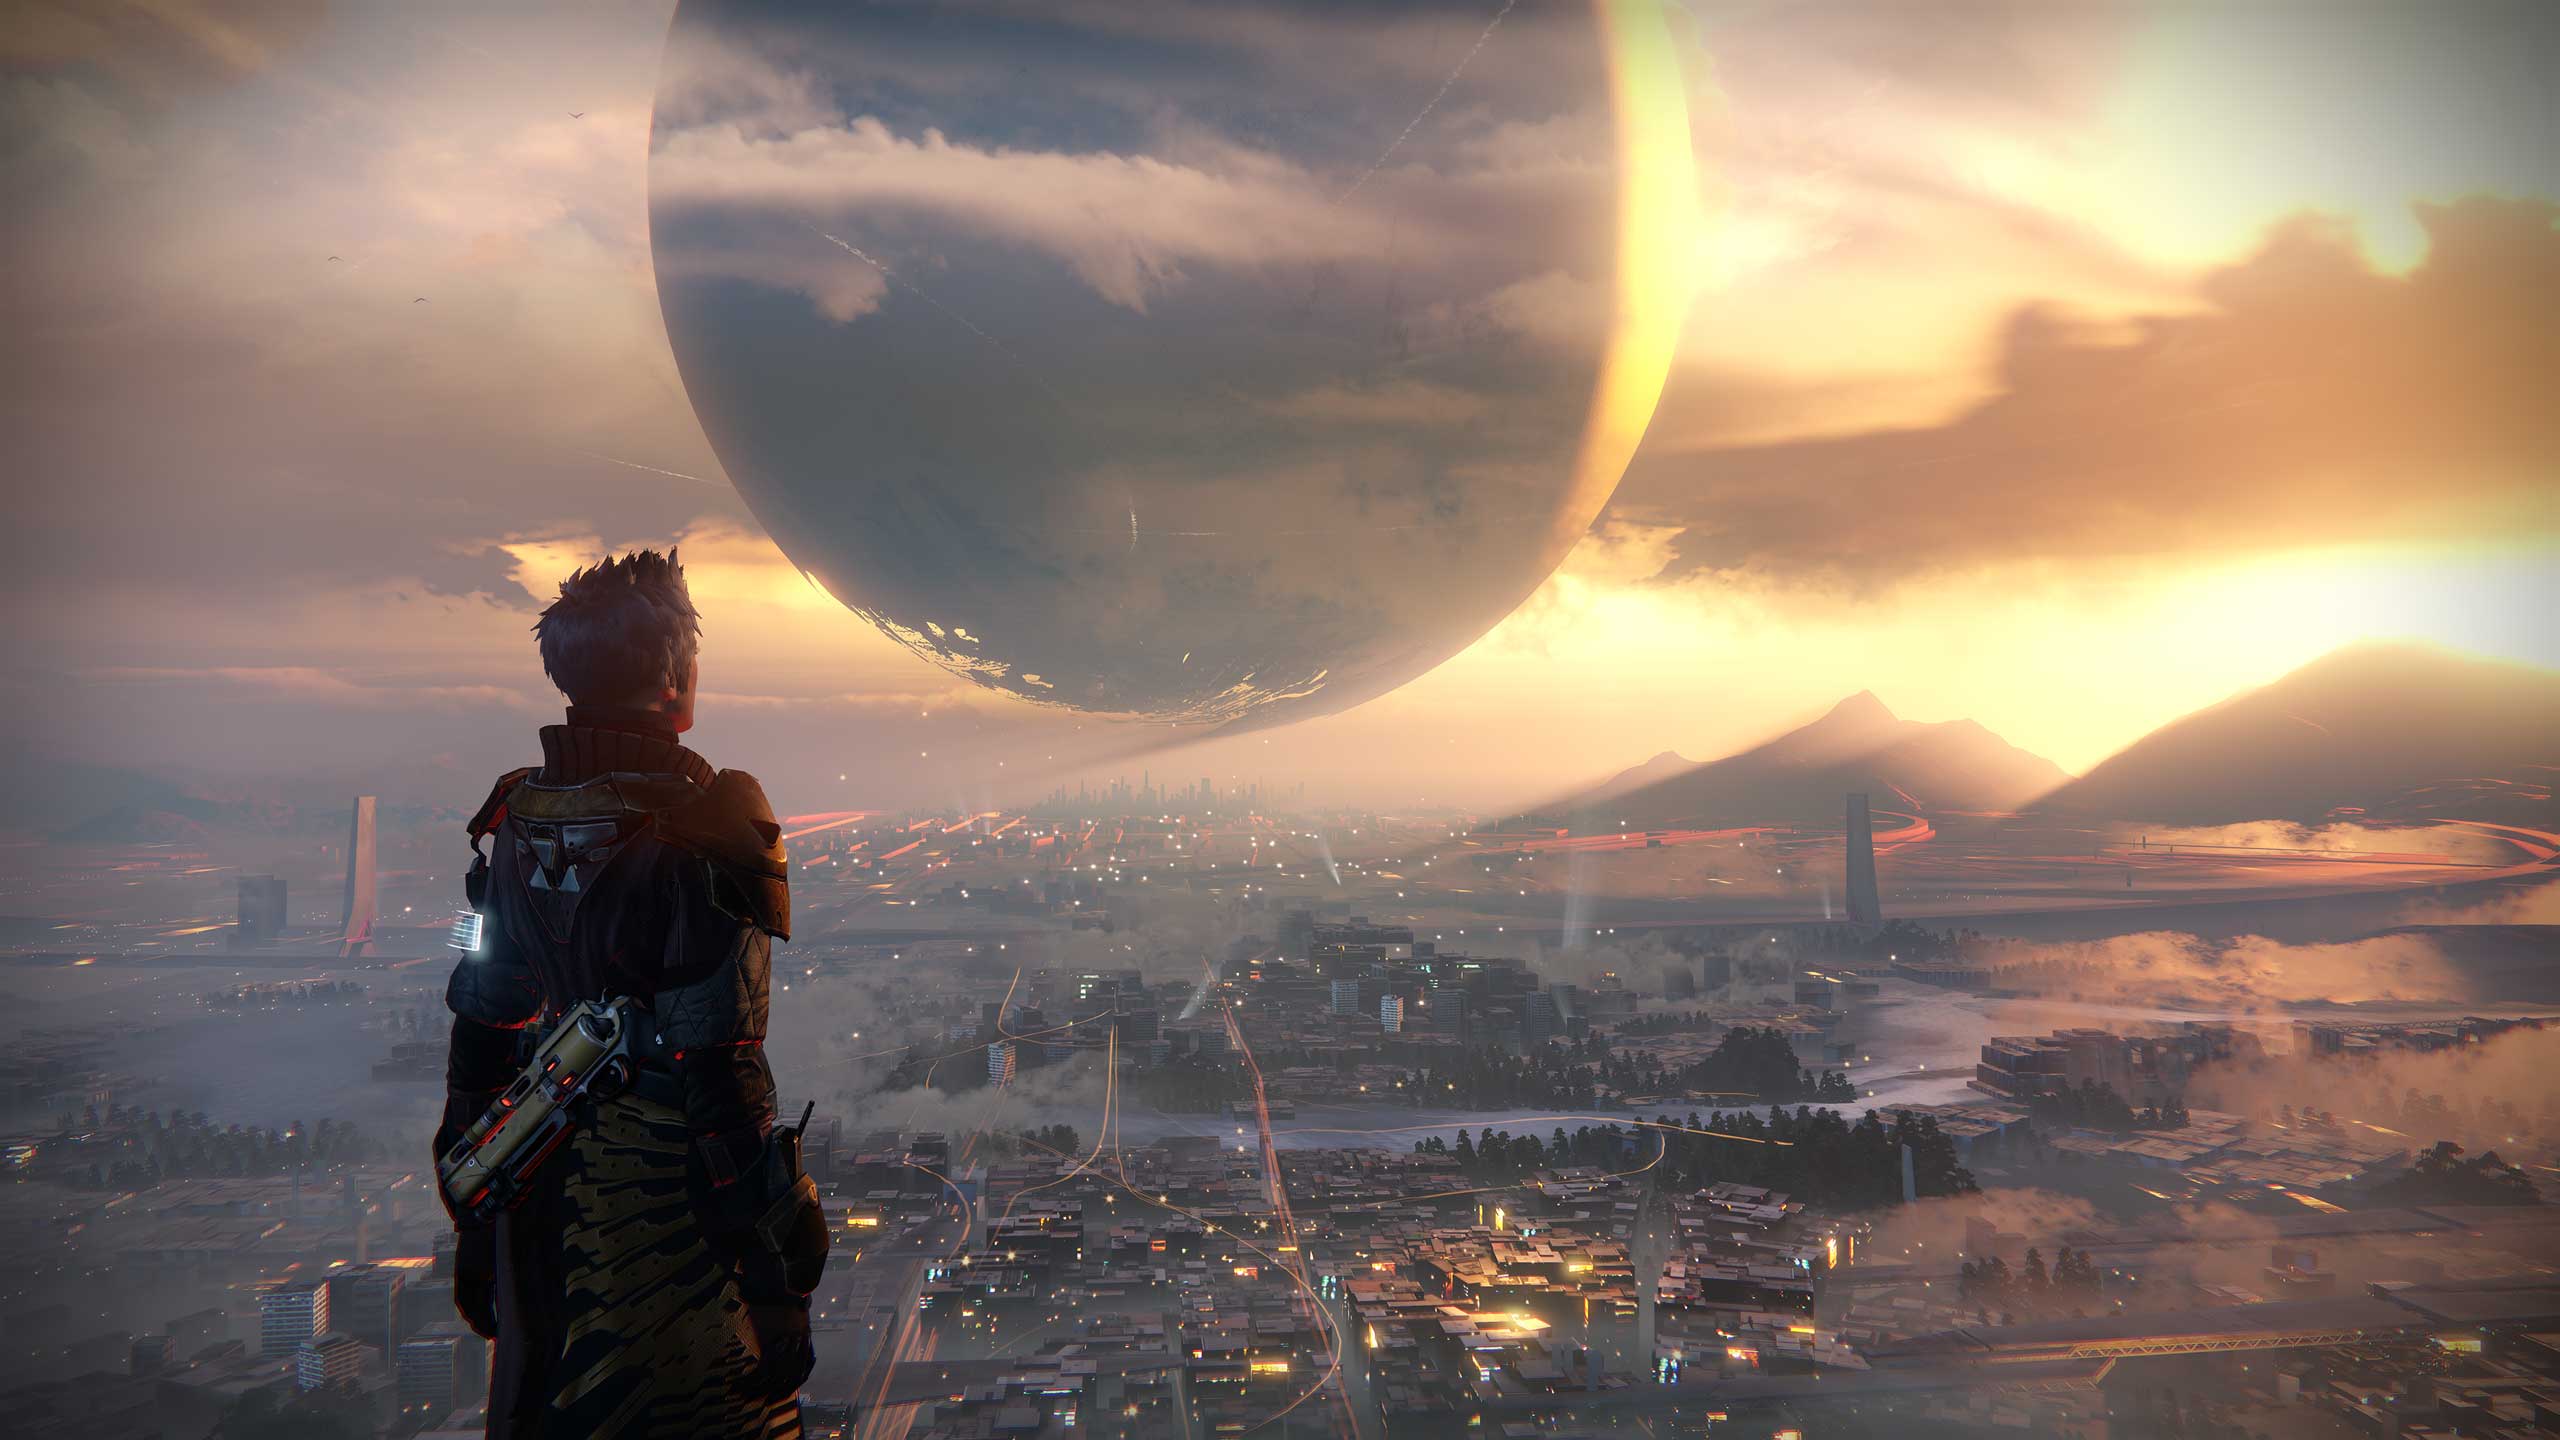 <strong>Destiny</strong>
                      
                      Built from scratch by ex-Halo studio Bungie, <i>Destiny</i>'s game engine was designed to scale across the next decade, says the studio. (Bungie)